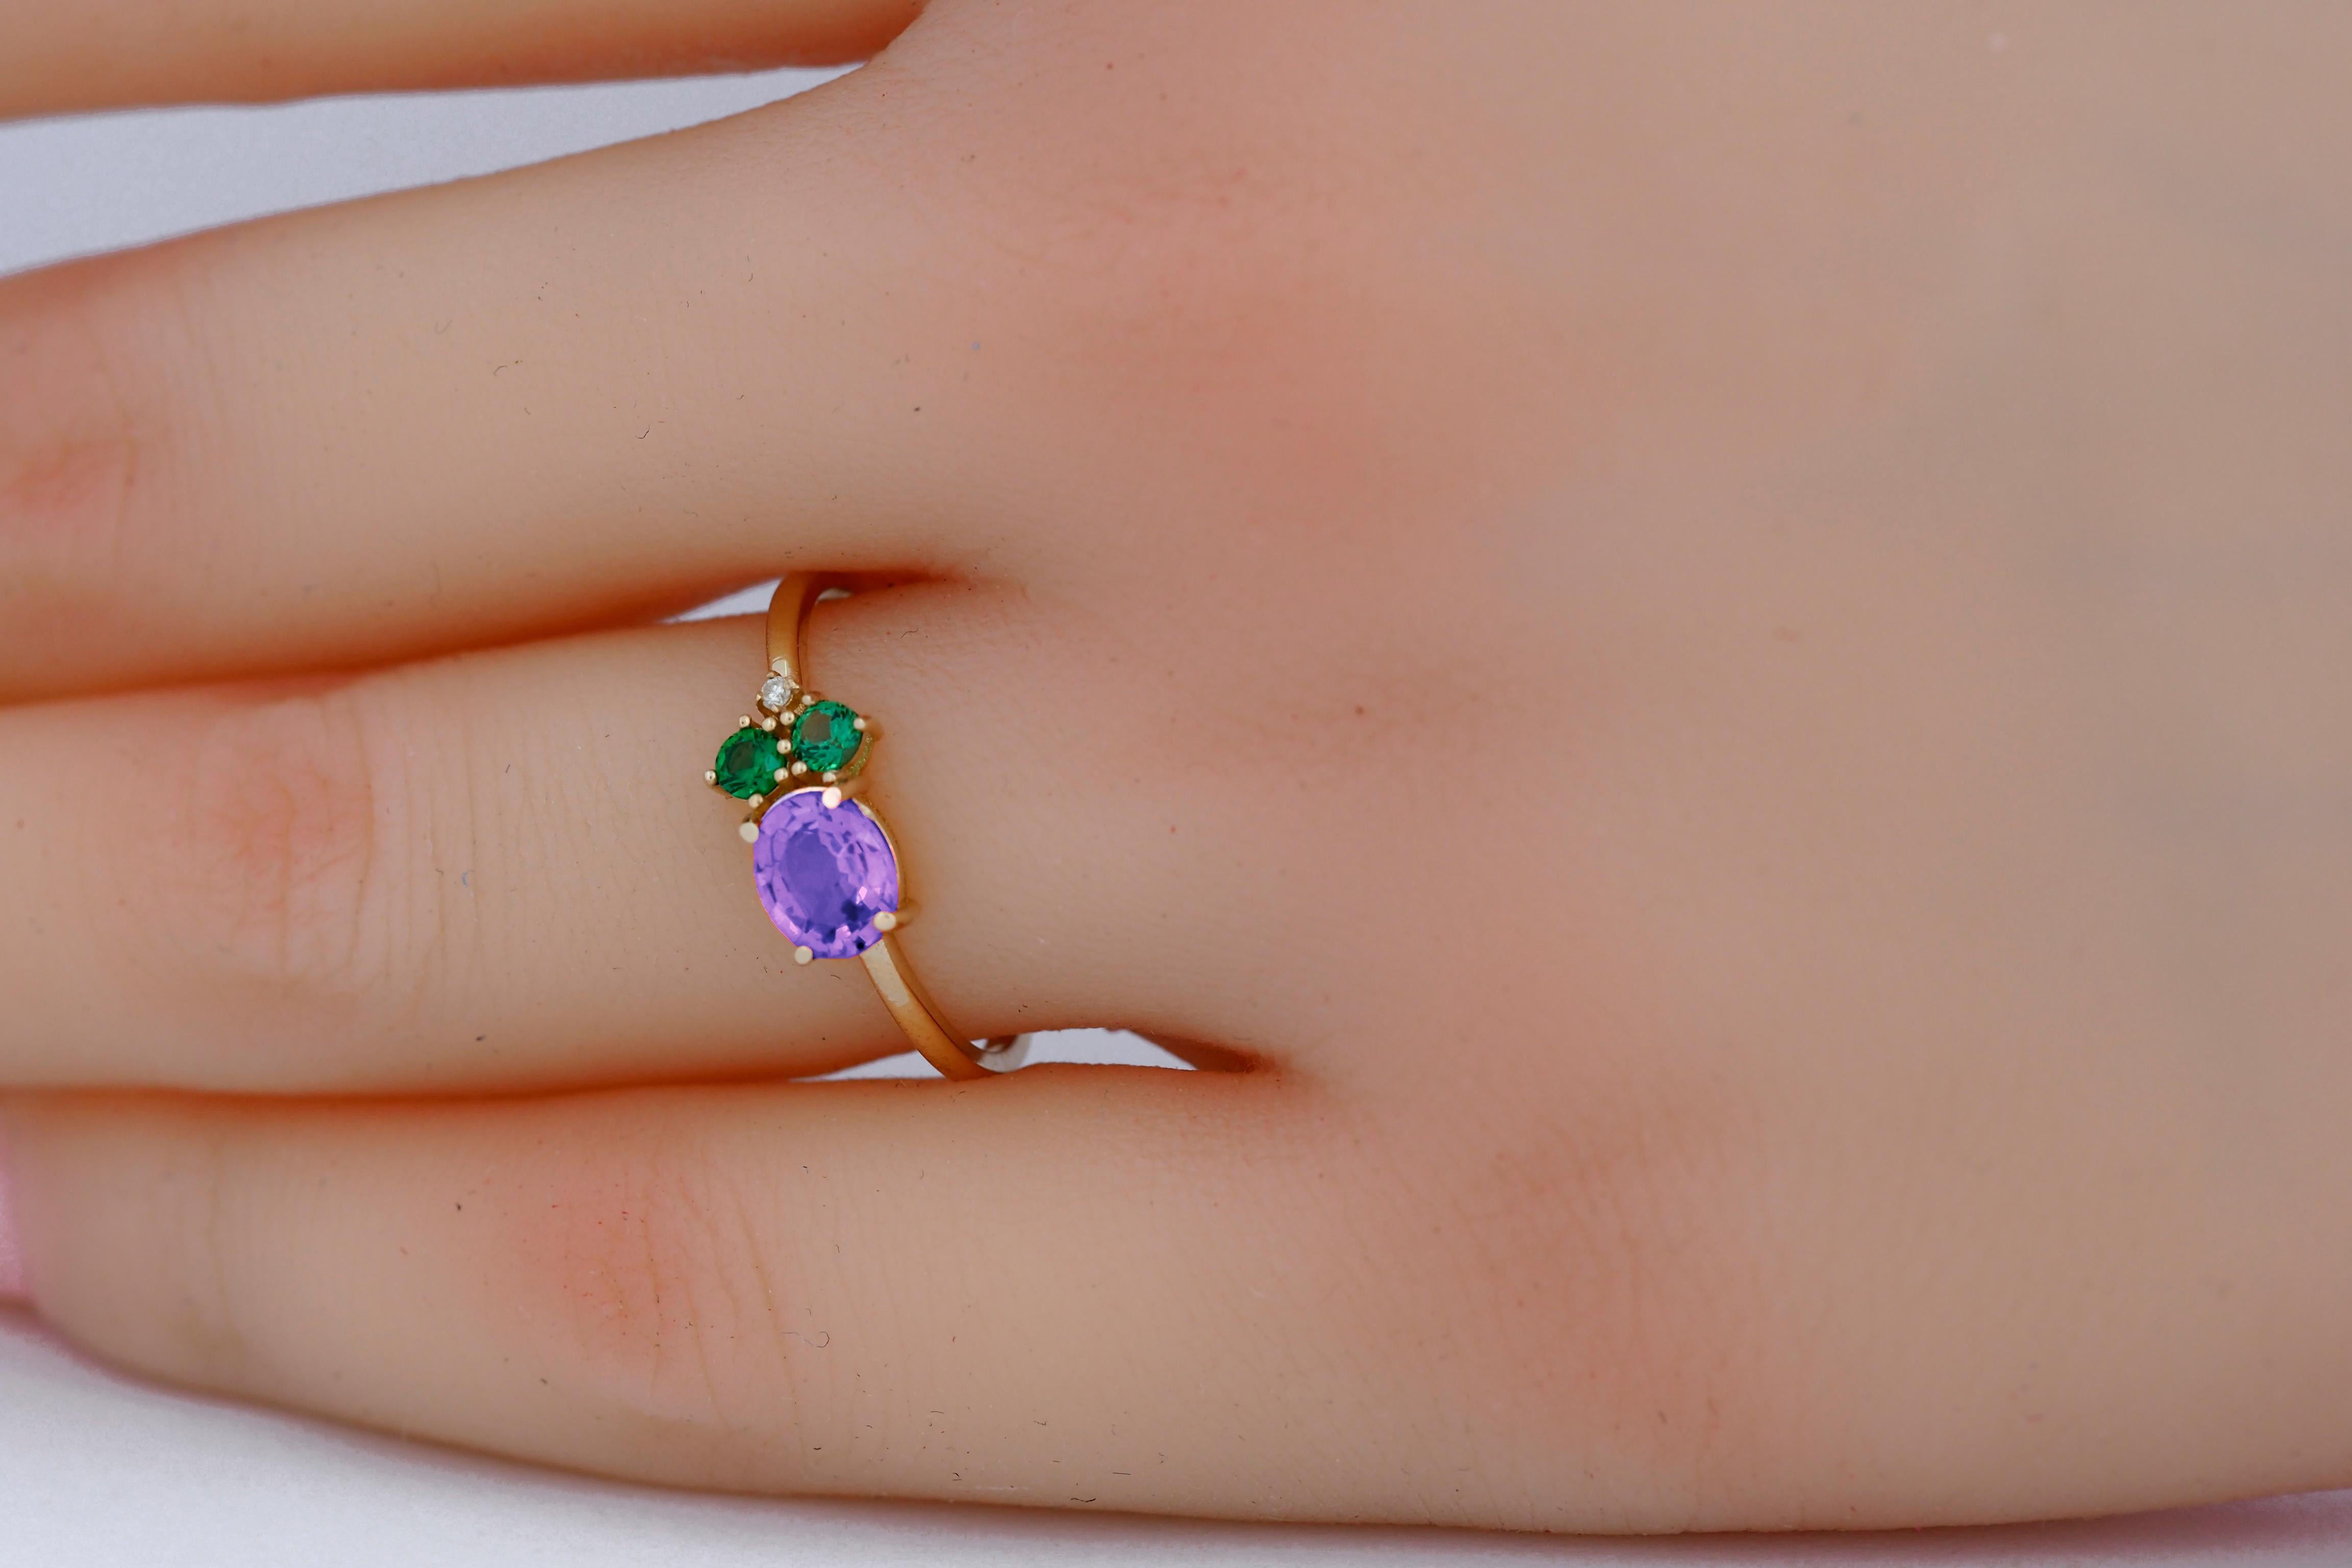 Oval amethyst, tsavorite and diamonds 14k gold ring.
Amethyst gold ring. Amethyst cluster ring. Amethyst engagement ring.

Metal: 14k gold
Weight: 1.8 gr (depends from size)

Gemstones:
Set with amethyst color - purple
Oval cut, aprox 0.80